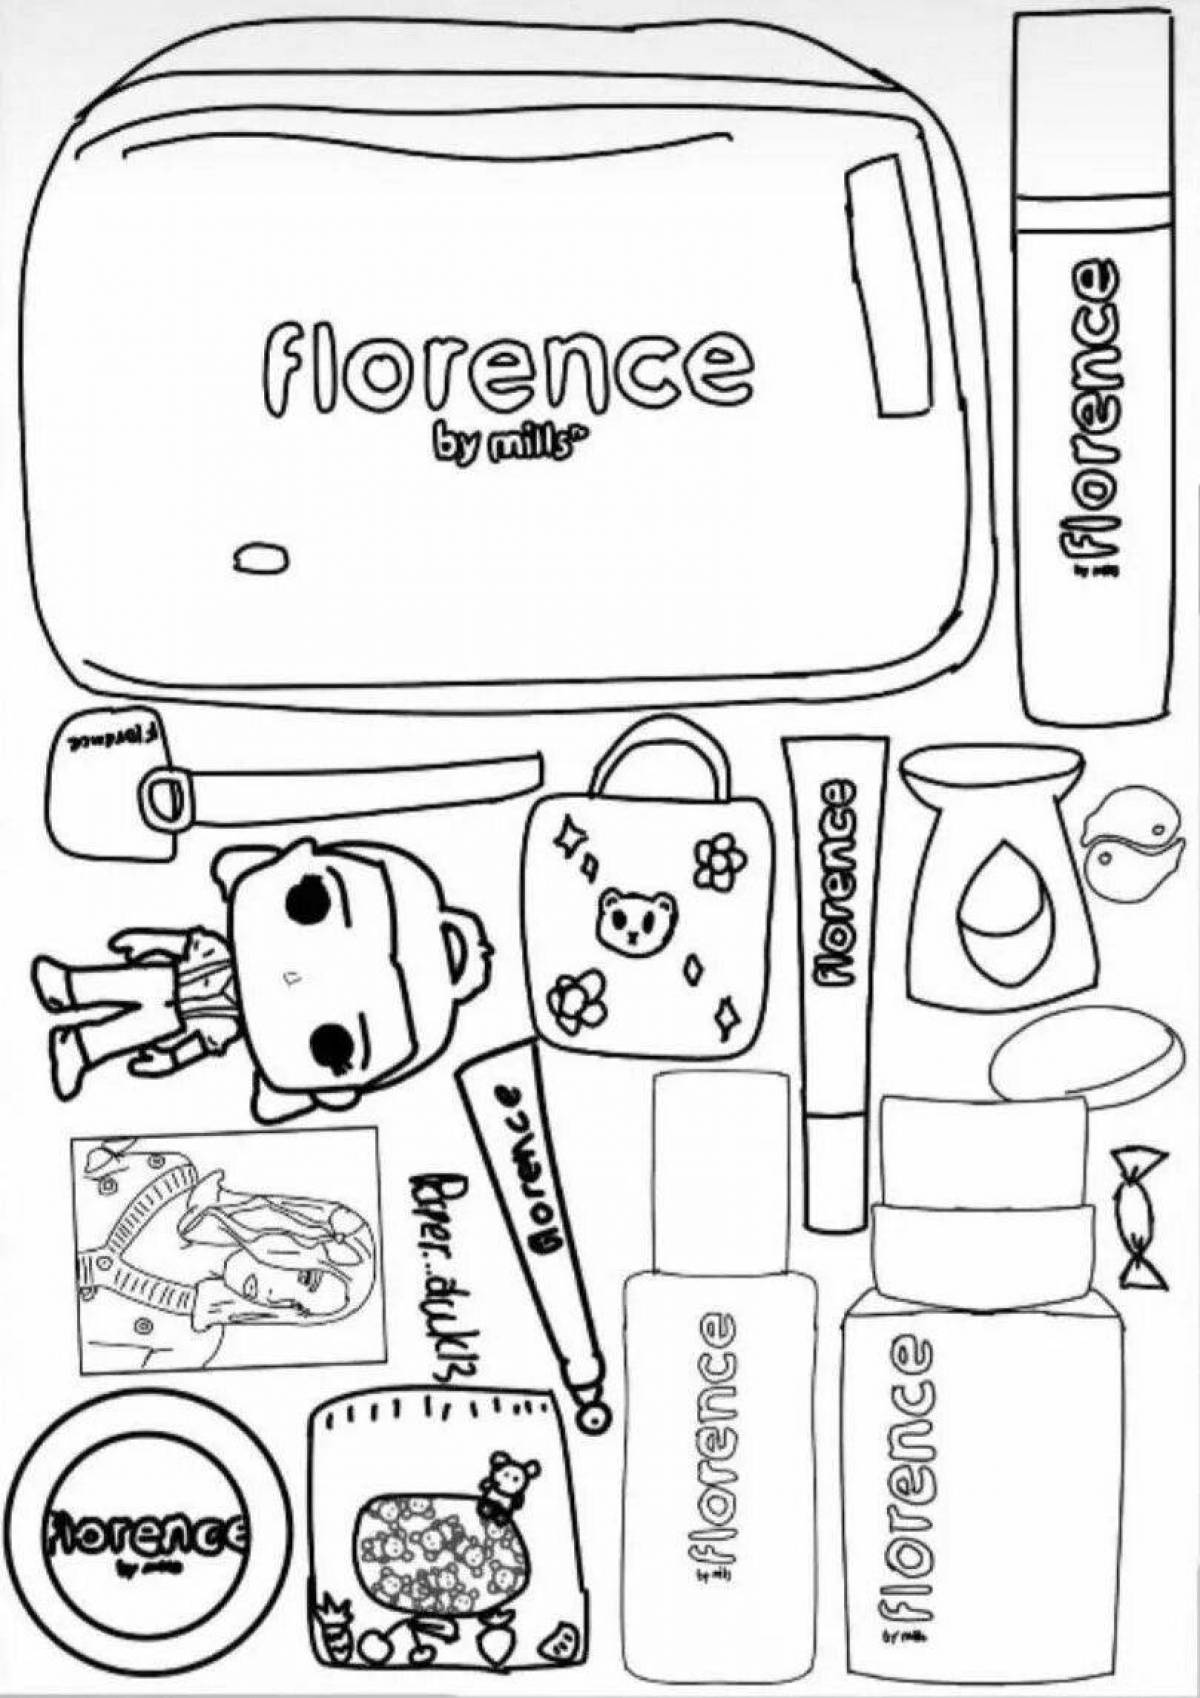 Animated cat coloring page - lalafanfan